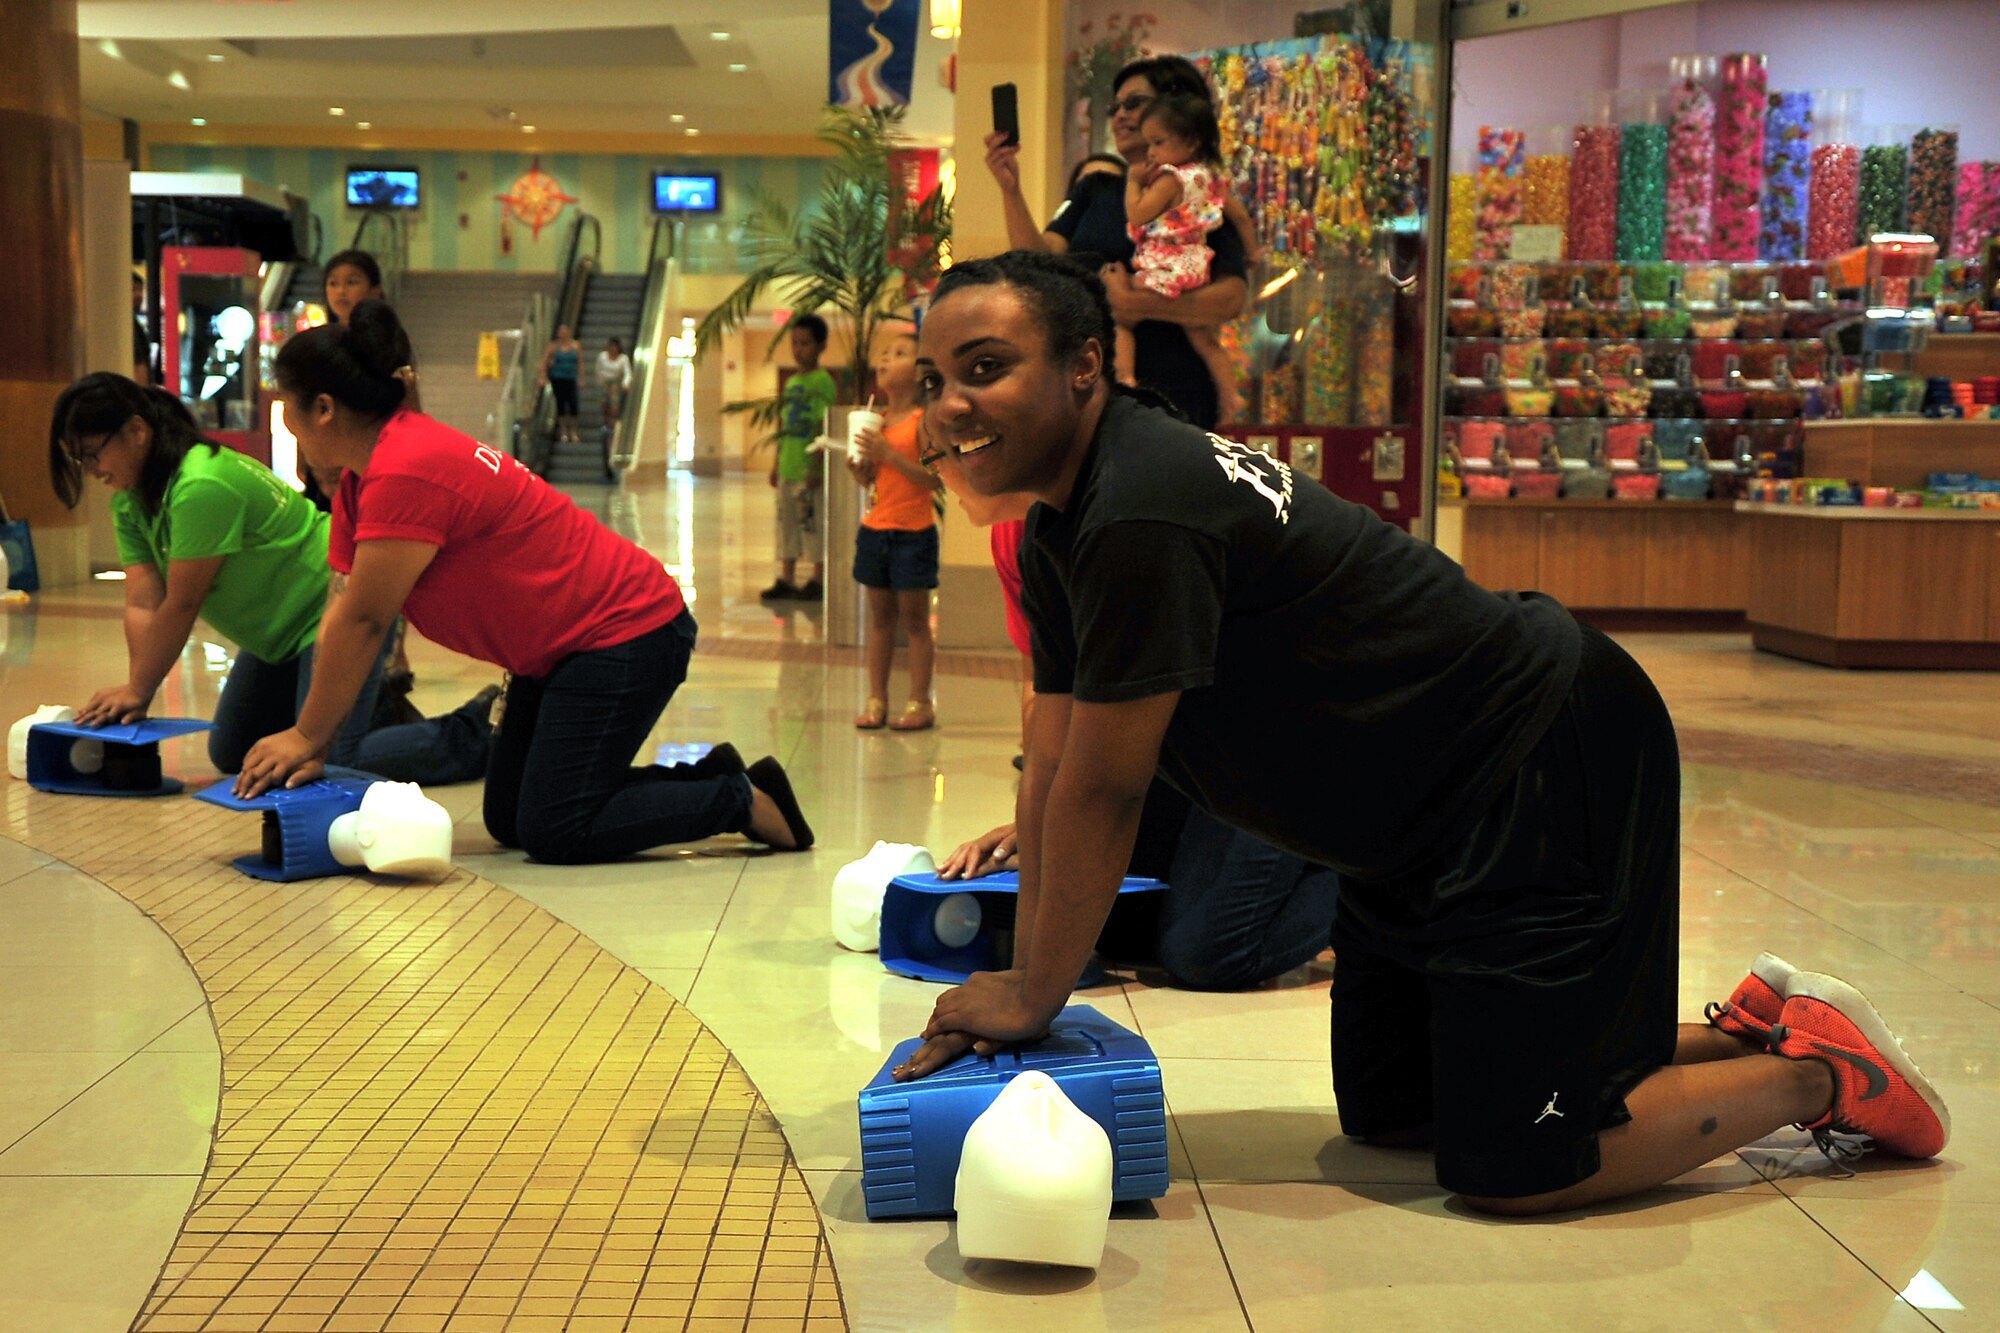 Airman Golden Wallace, 36th Civil Engineer Squadron firefighter, participates in a CPR-themed flash mob at the Agana Shopping Center, Guam, May 18, 2014. First responders from around Guam participated in the event during a public health fair in recognition of Emergency Medical Services Week to bring awareness to how CPR could help save lives. (U.S. Air Force photo by Staff Sgt. Melissa B. White/Released)